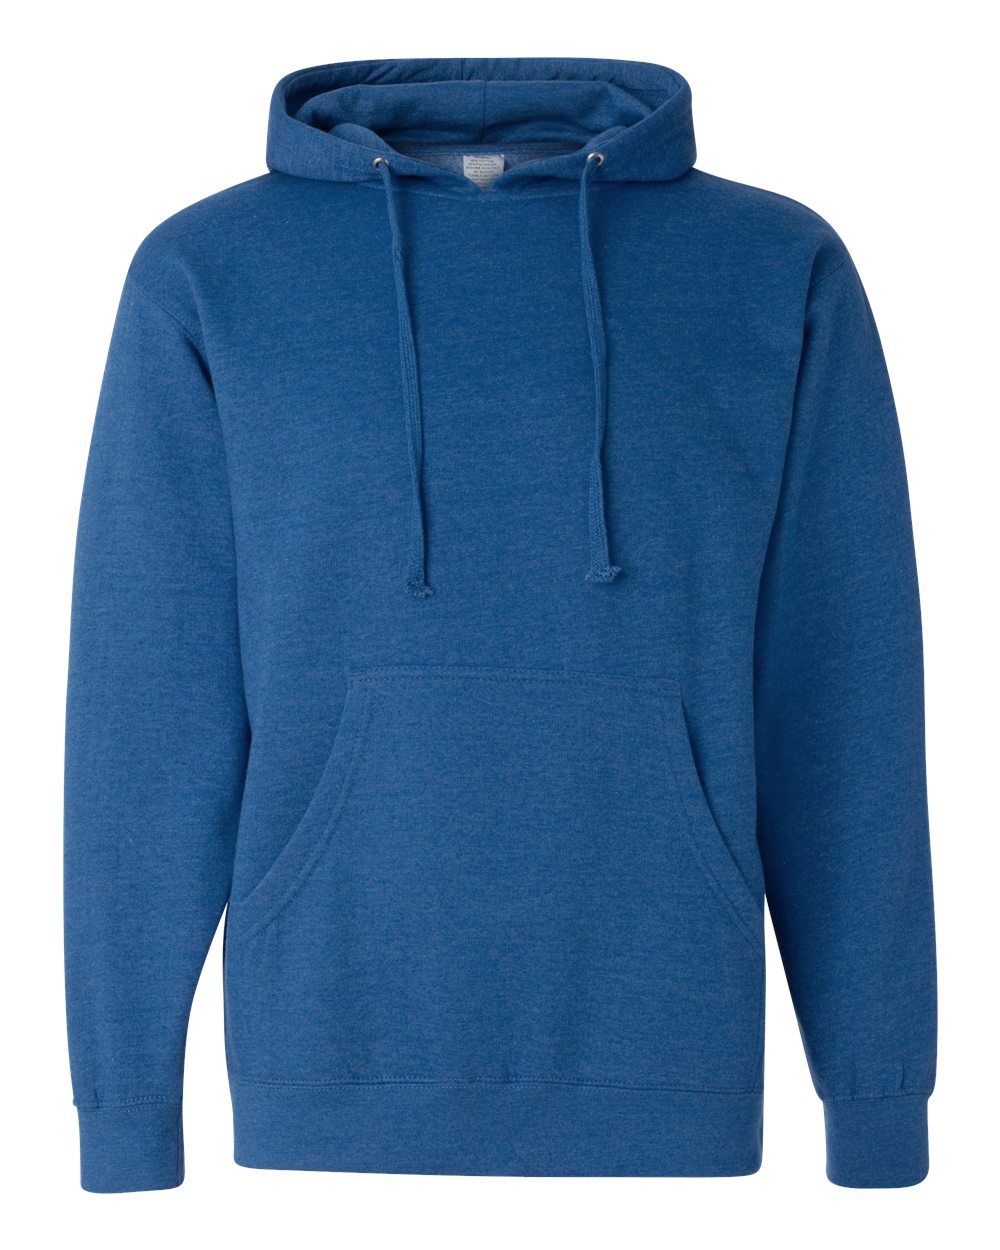 Independent Trading Co. SS4500, Midweight Hooded Sweatshirt